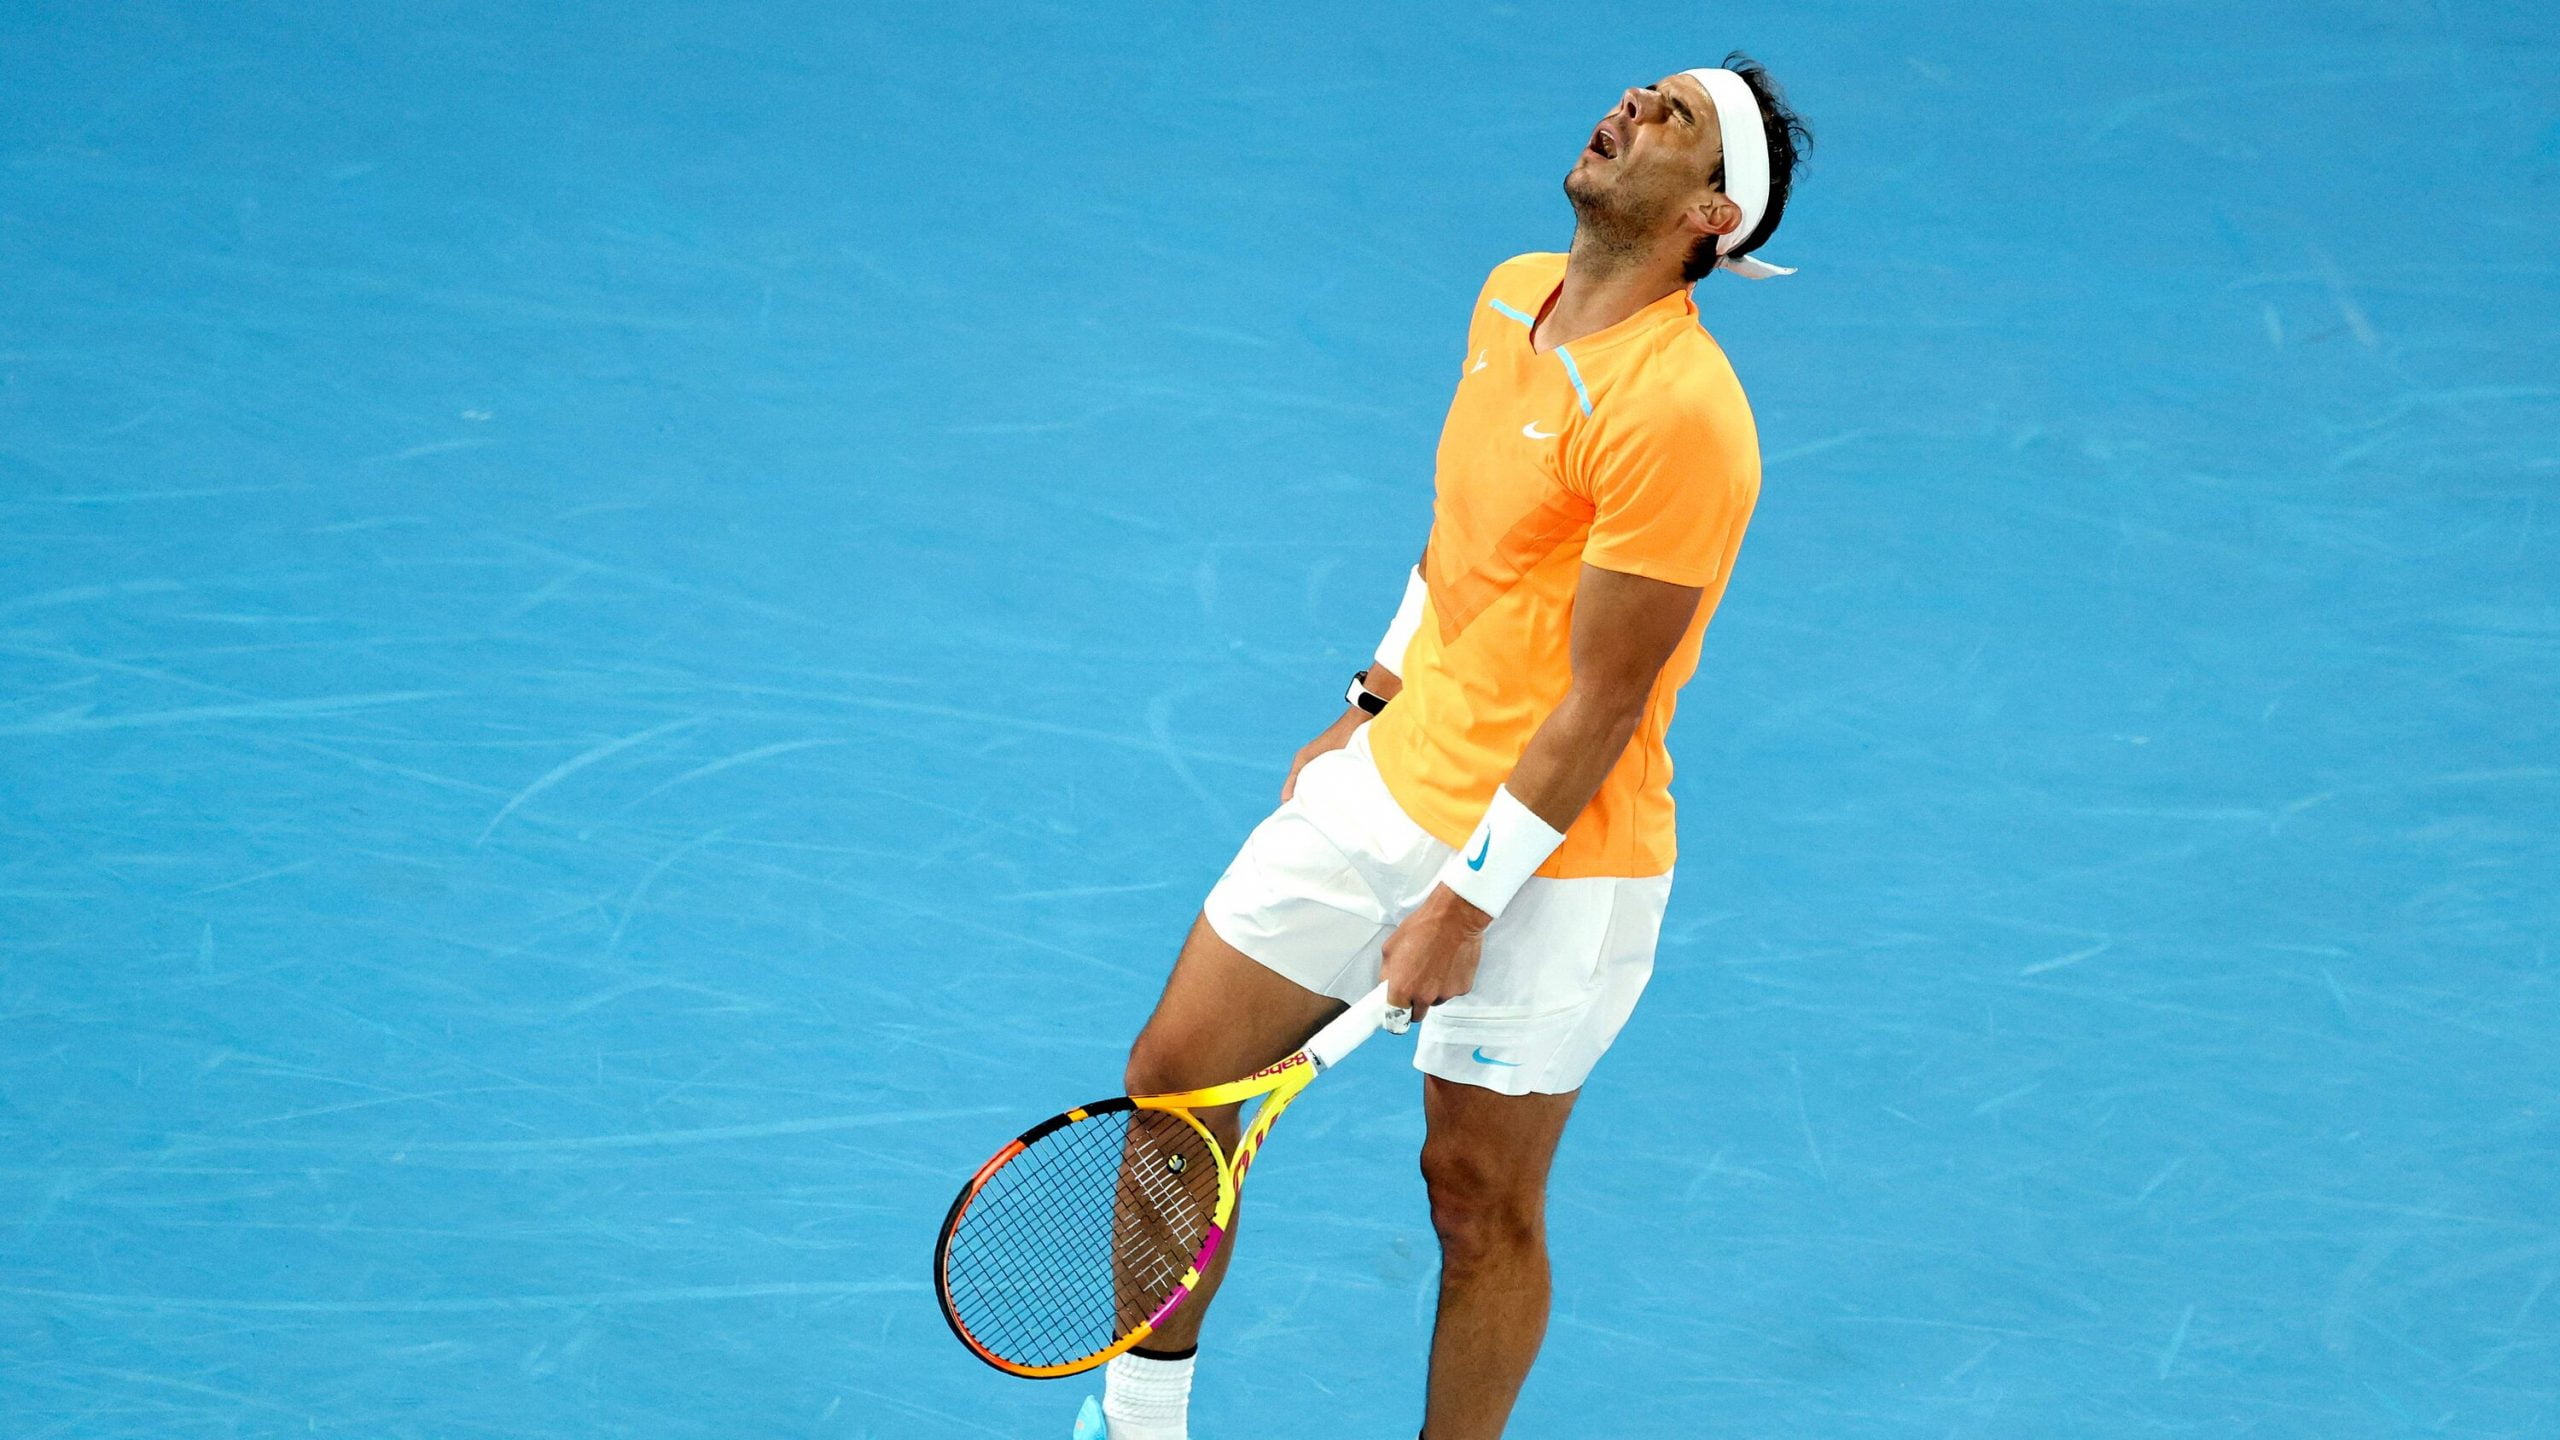 Nadal will be out of action for 6-8 weeks due to injury